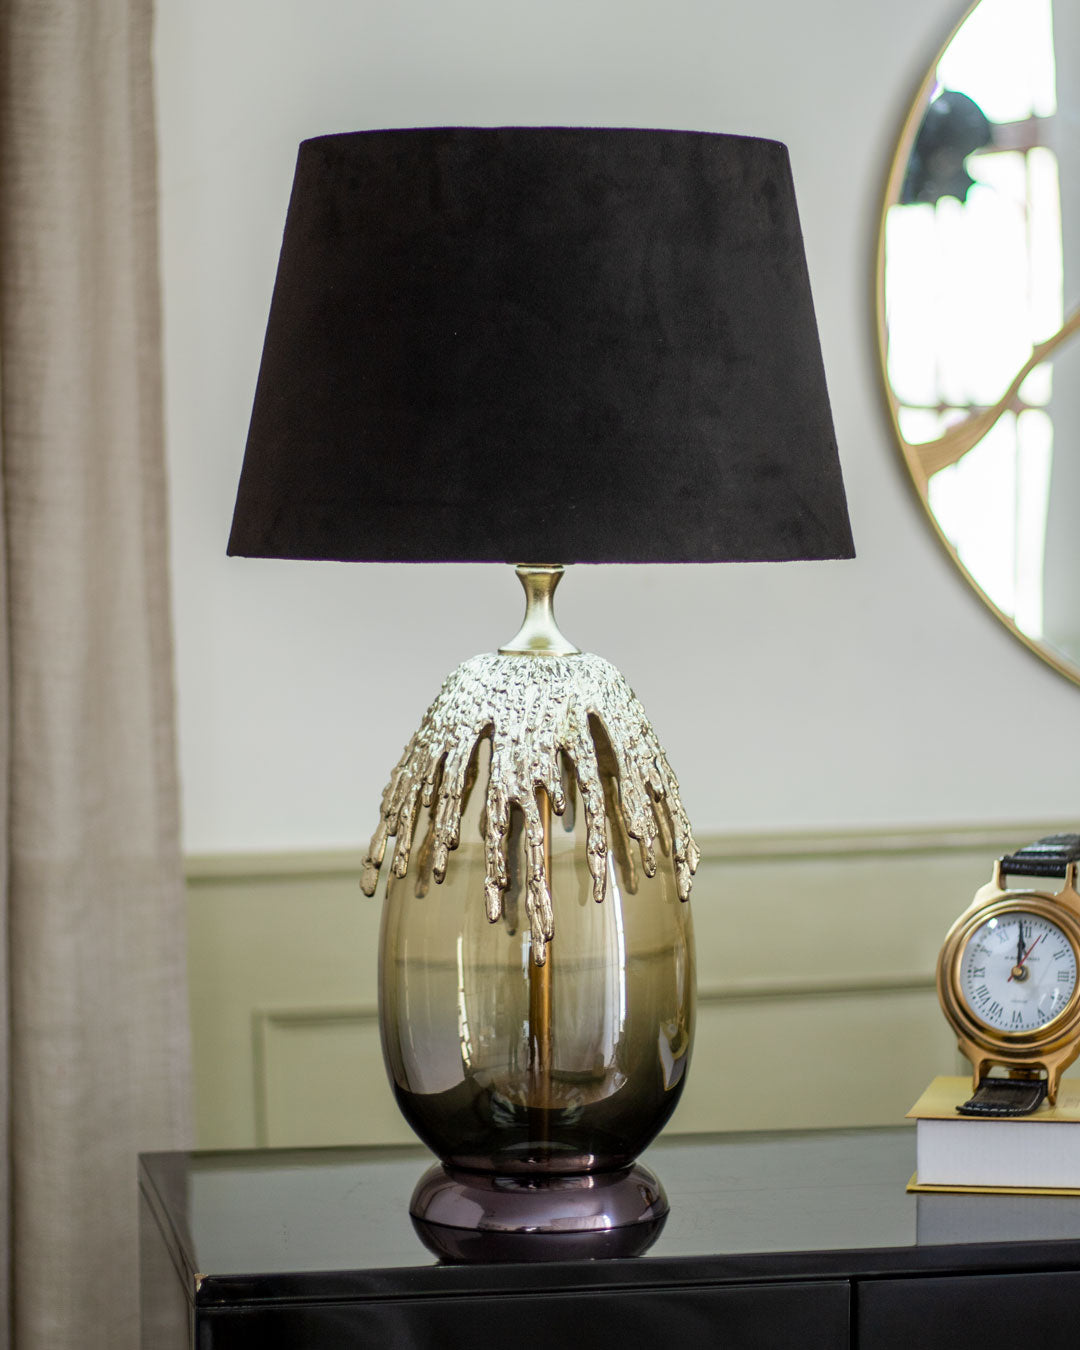 'String of Pearls' Table Lamp